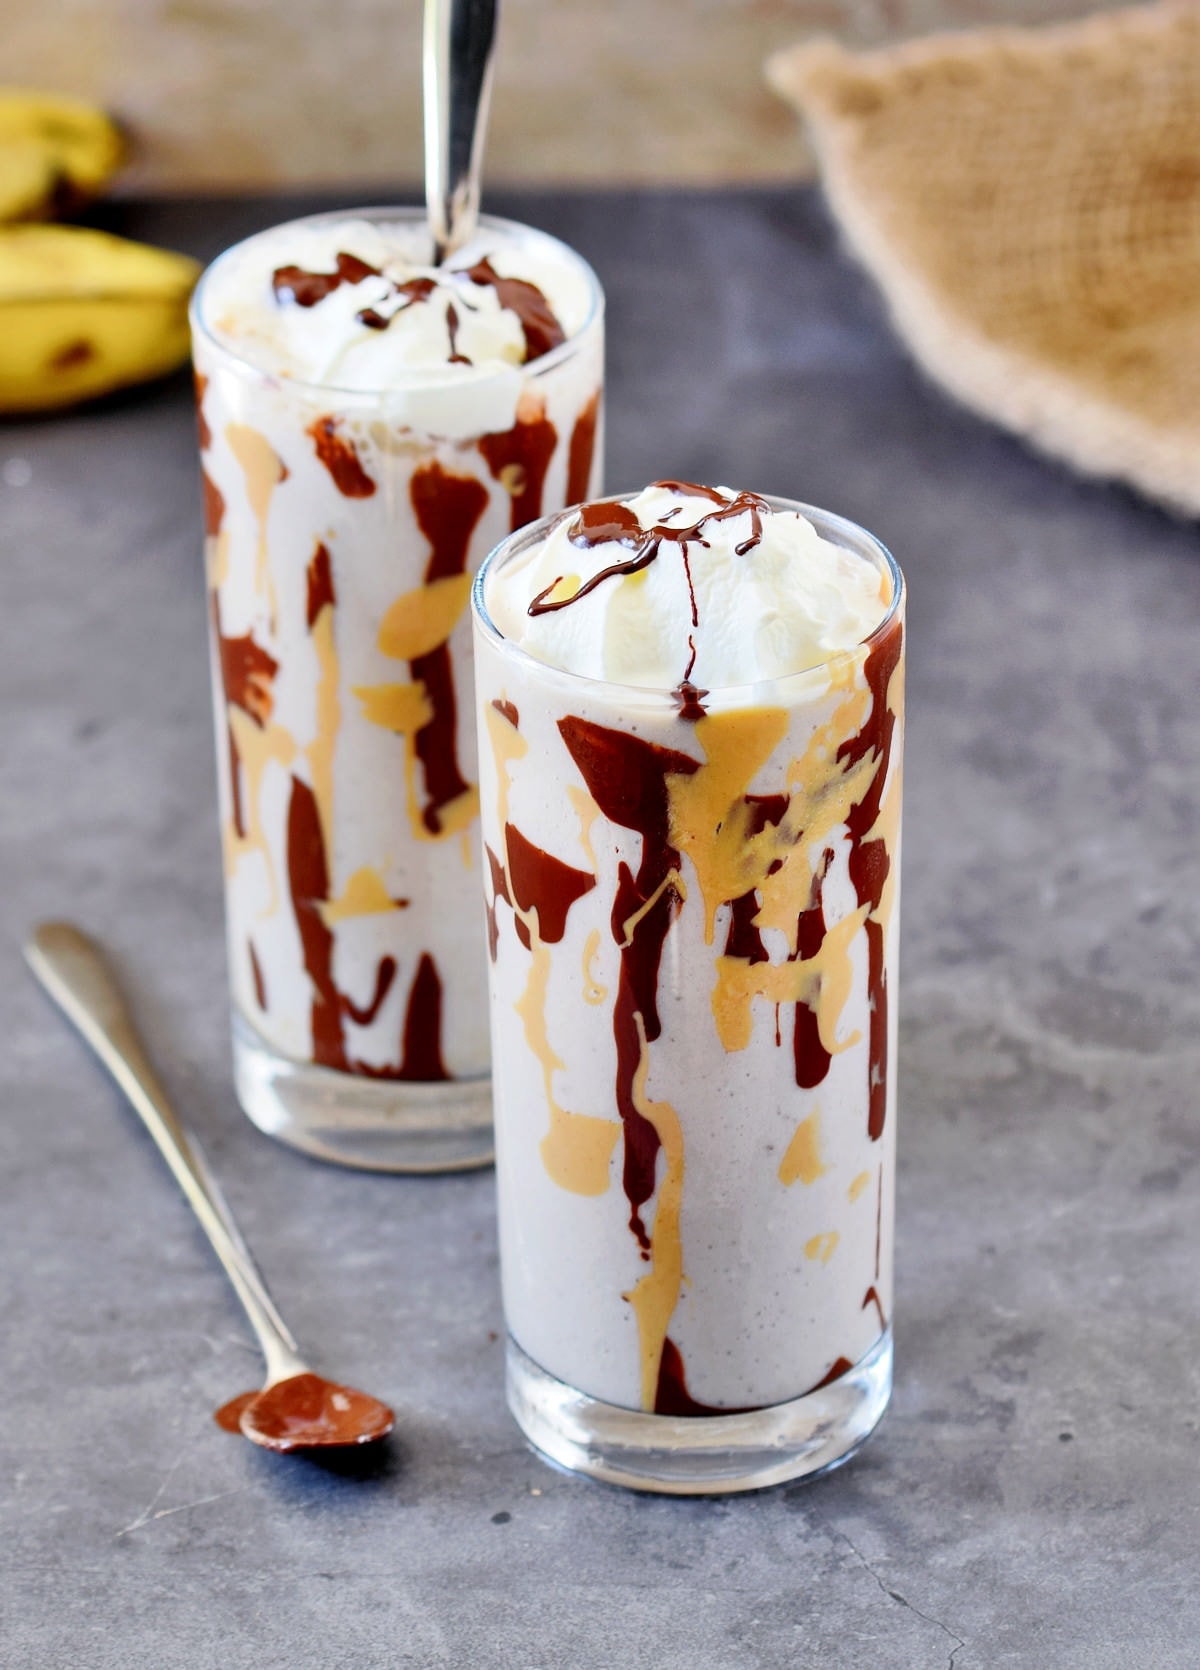 banana shake decorated with vegan whipped cream, chocolate and peanut butter in 2 glasses with long spoons